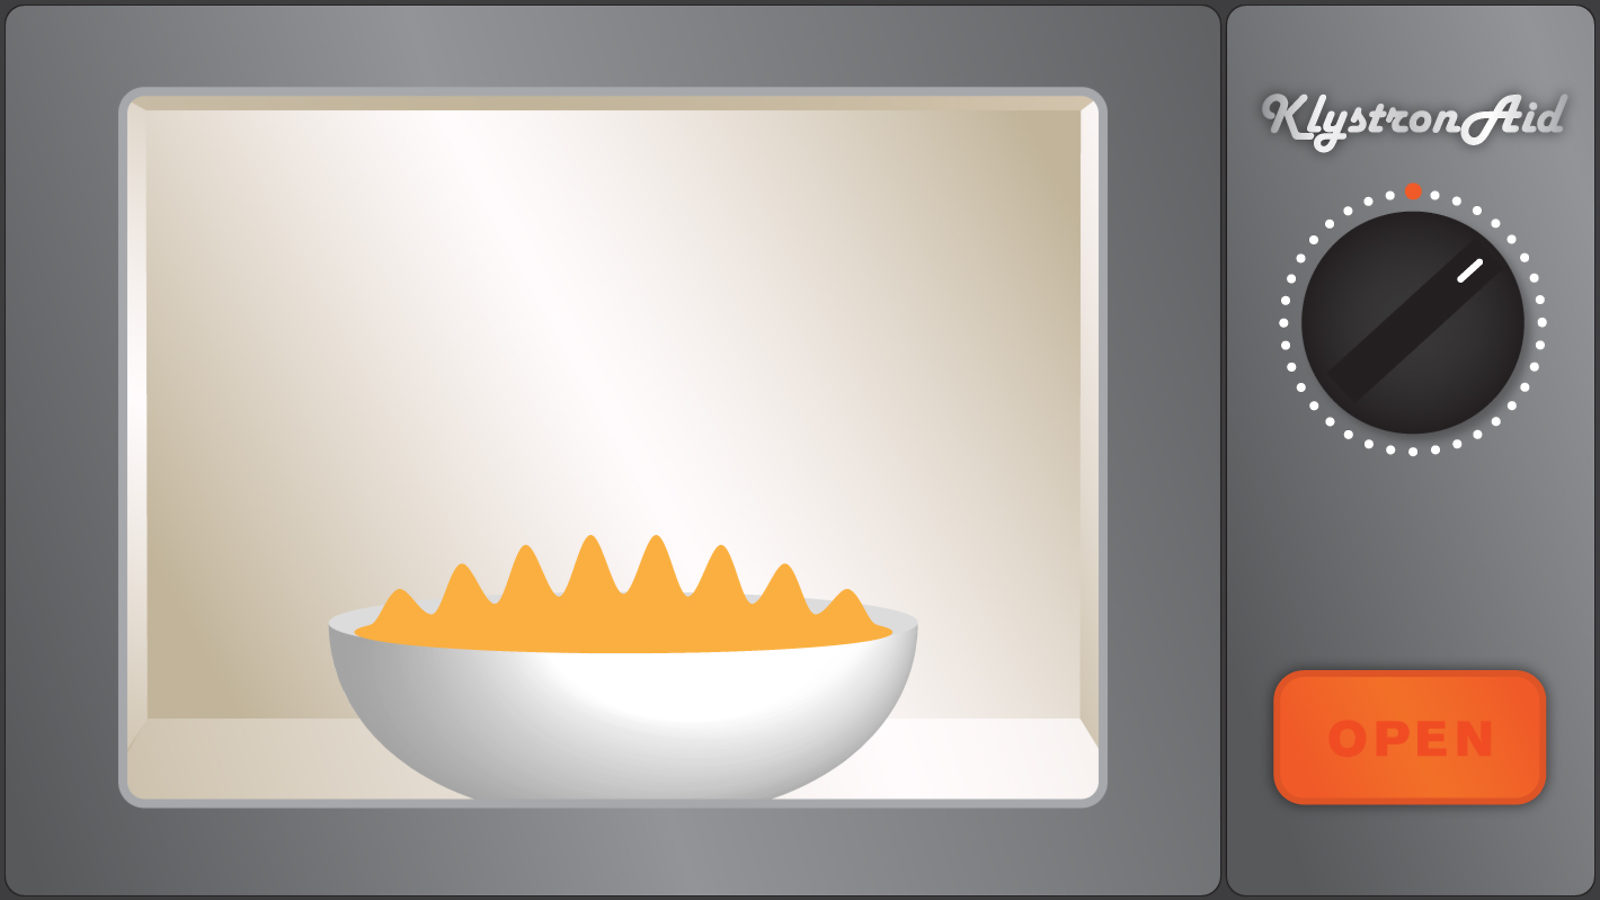 Illustration of "Klyston Aid" microwave with bowl of food inside 